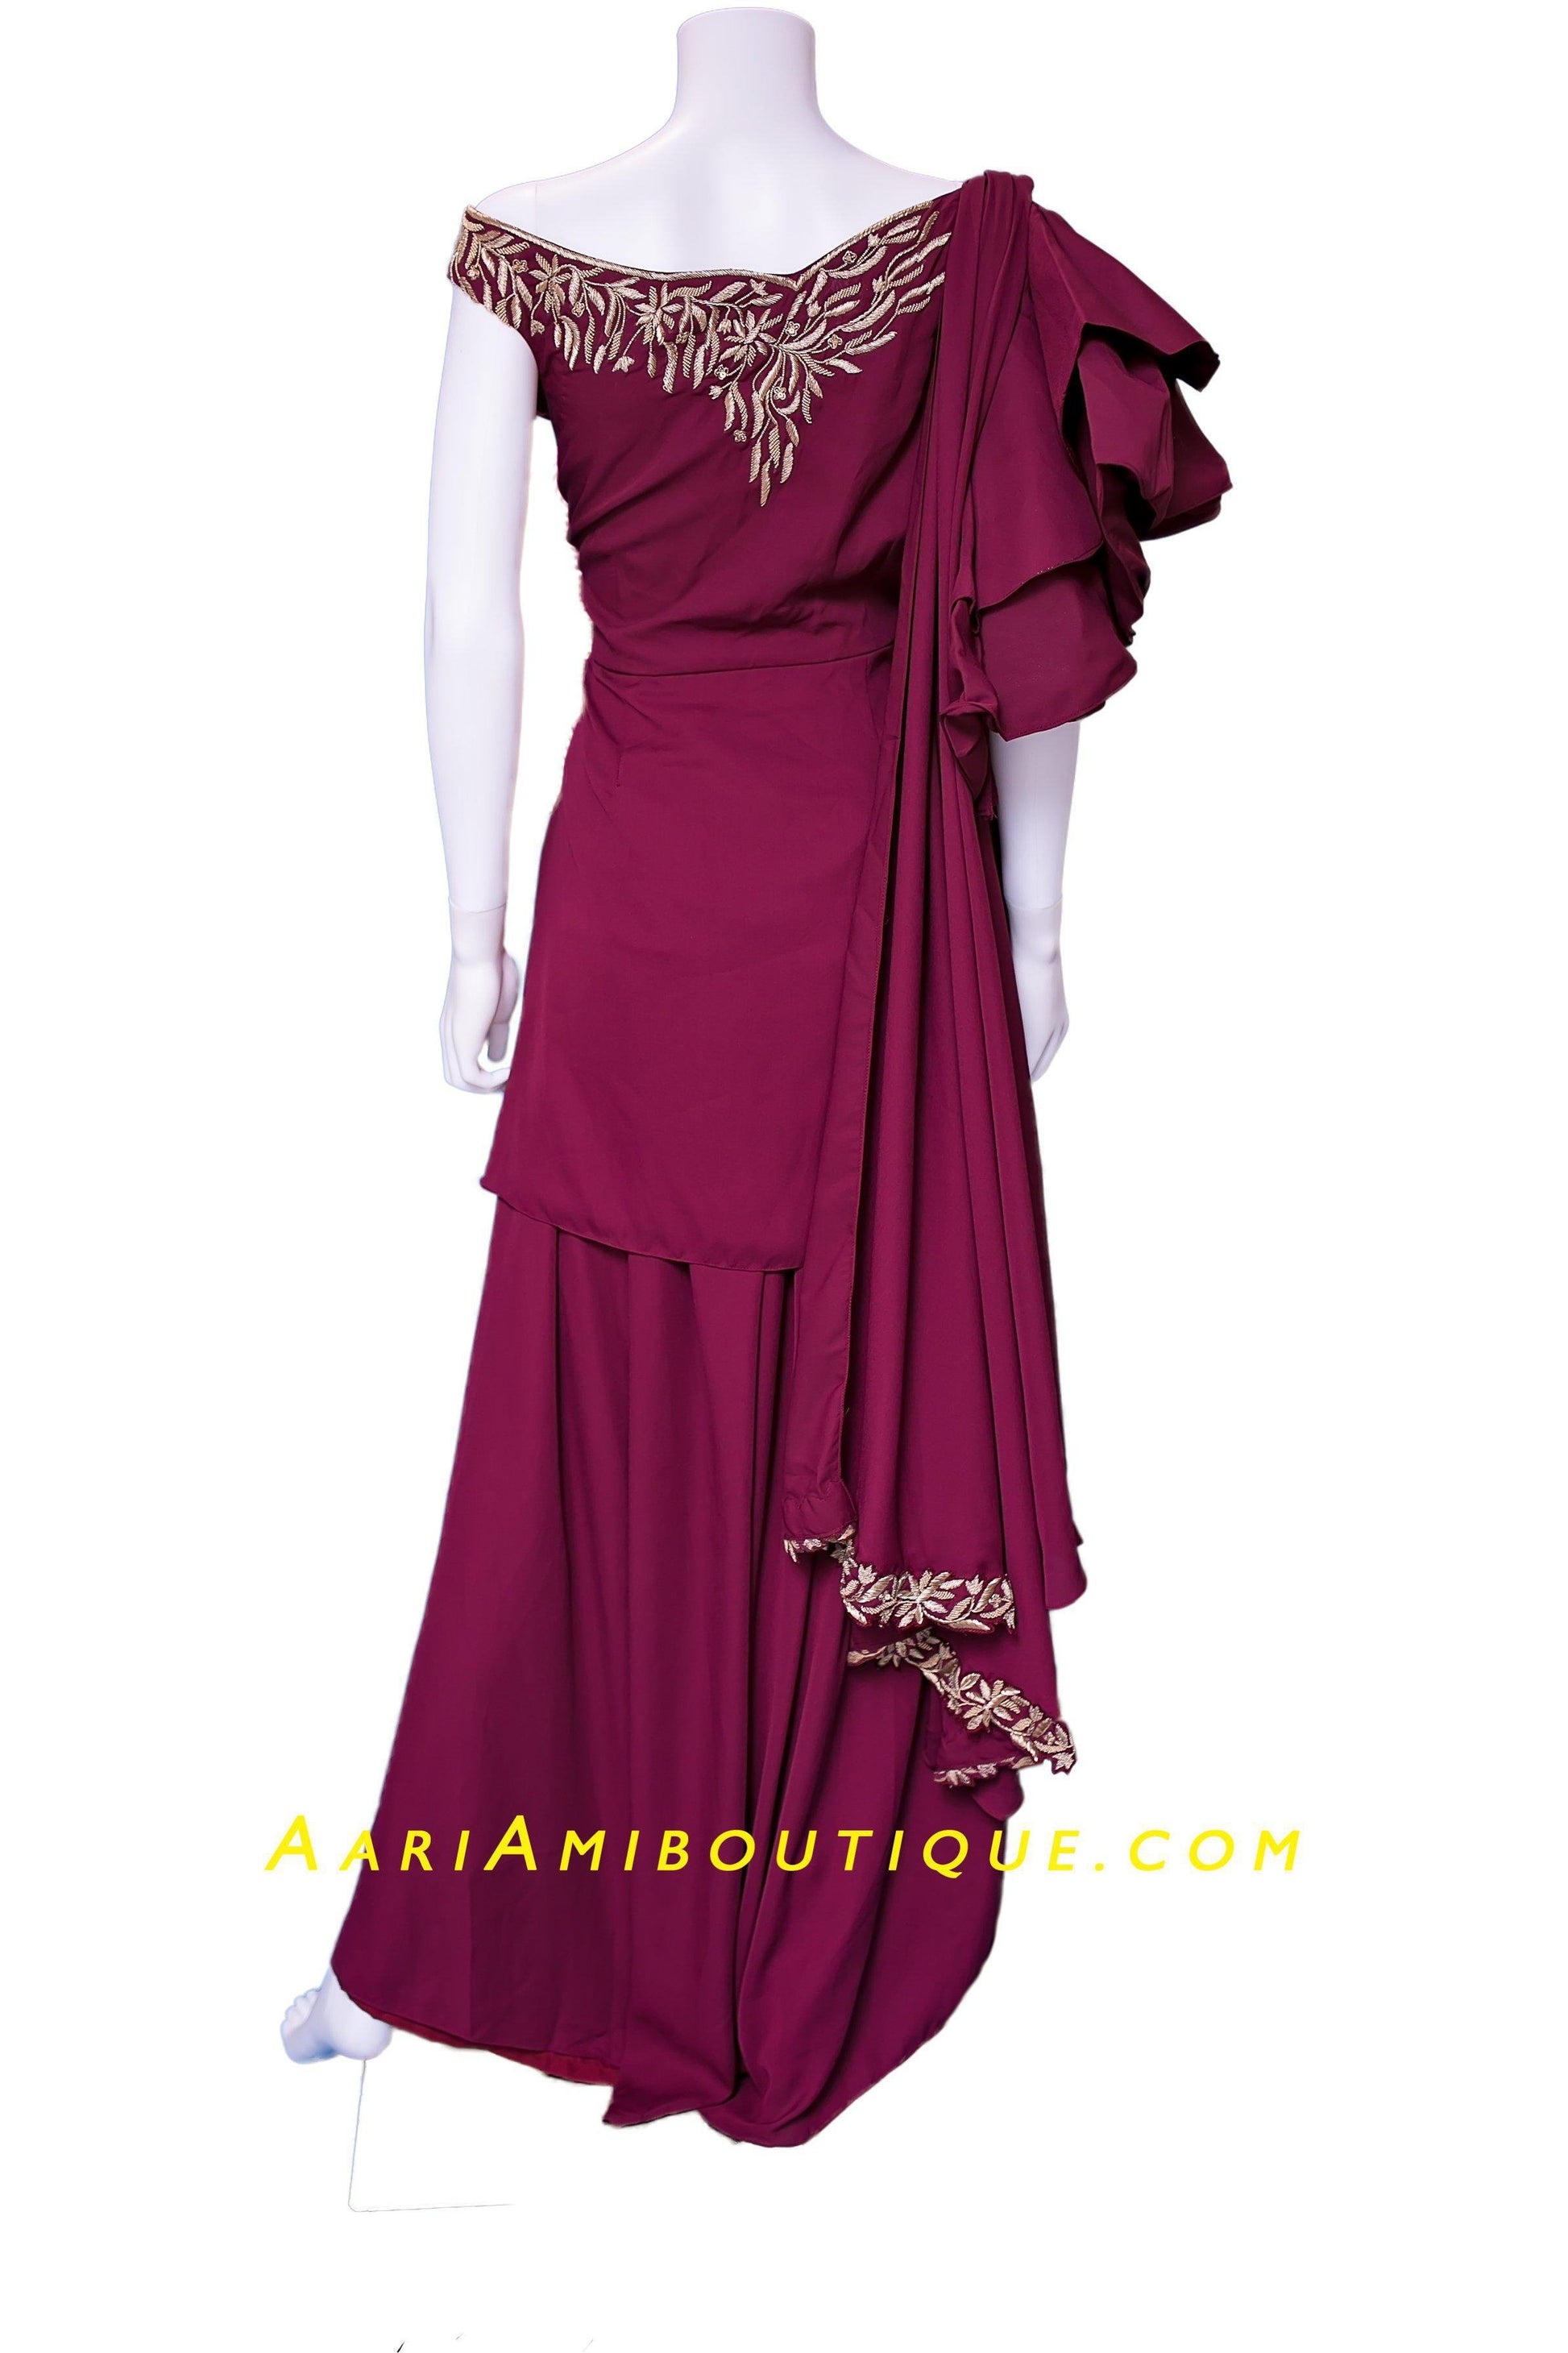 Burgundy and Gold Embroidered Dhoti Set with attached dupatta drape-AariAmi Boutique